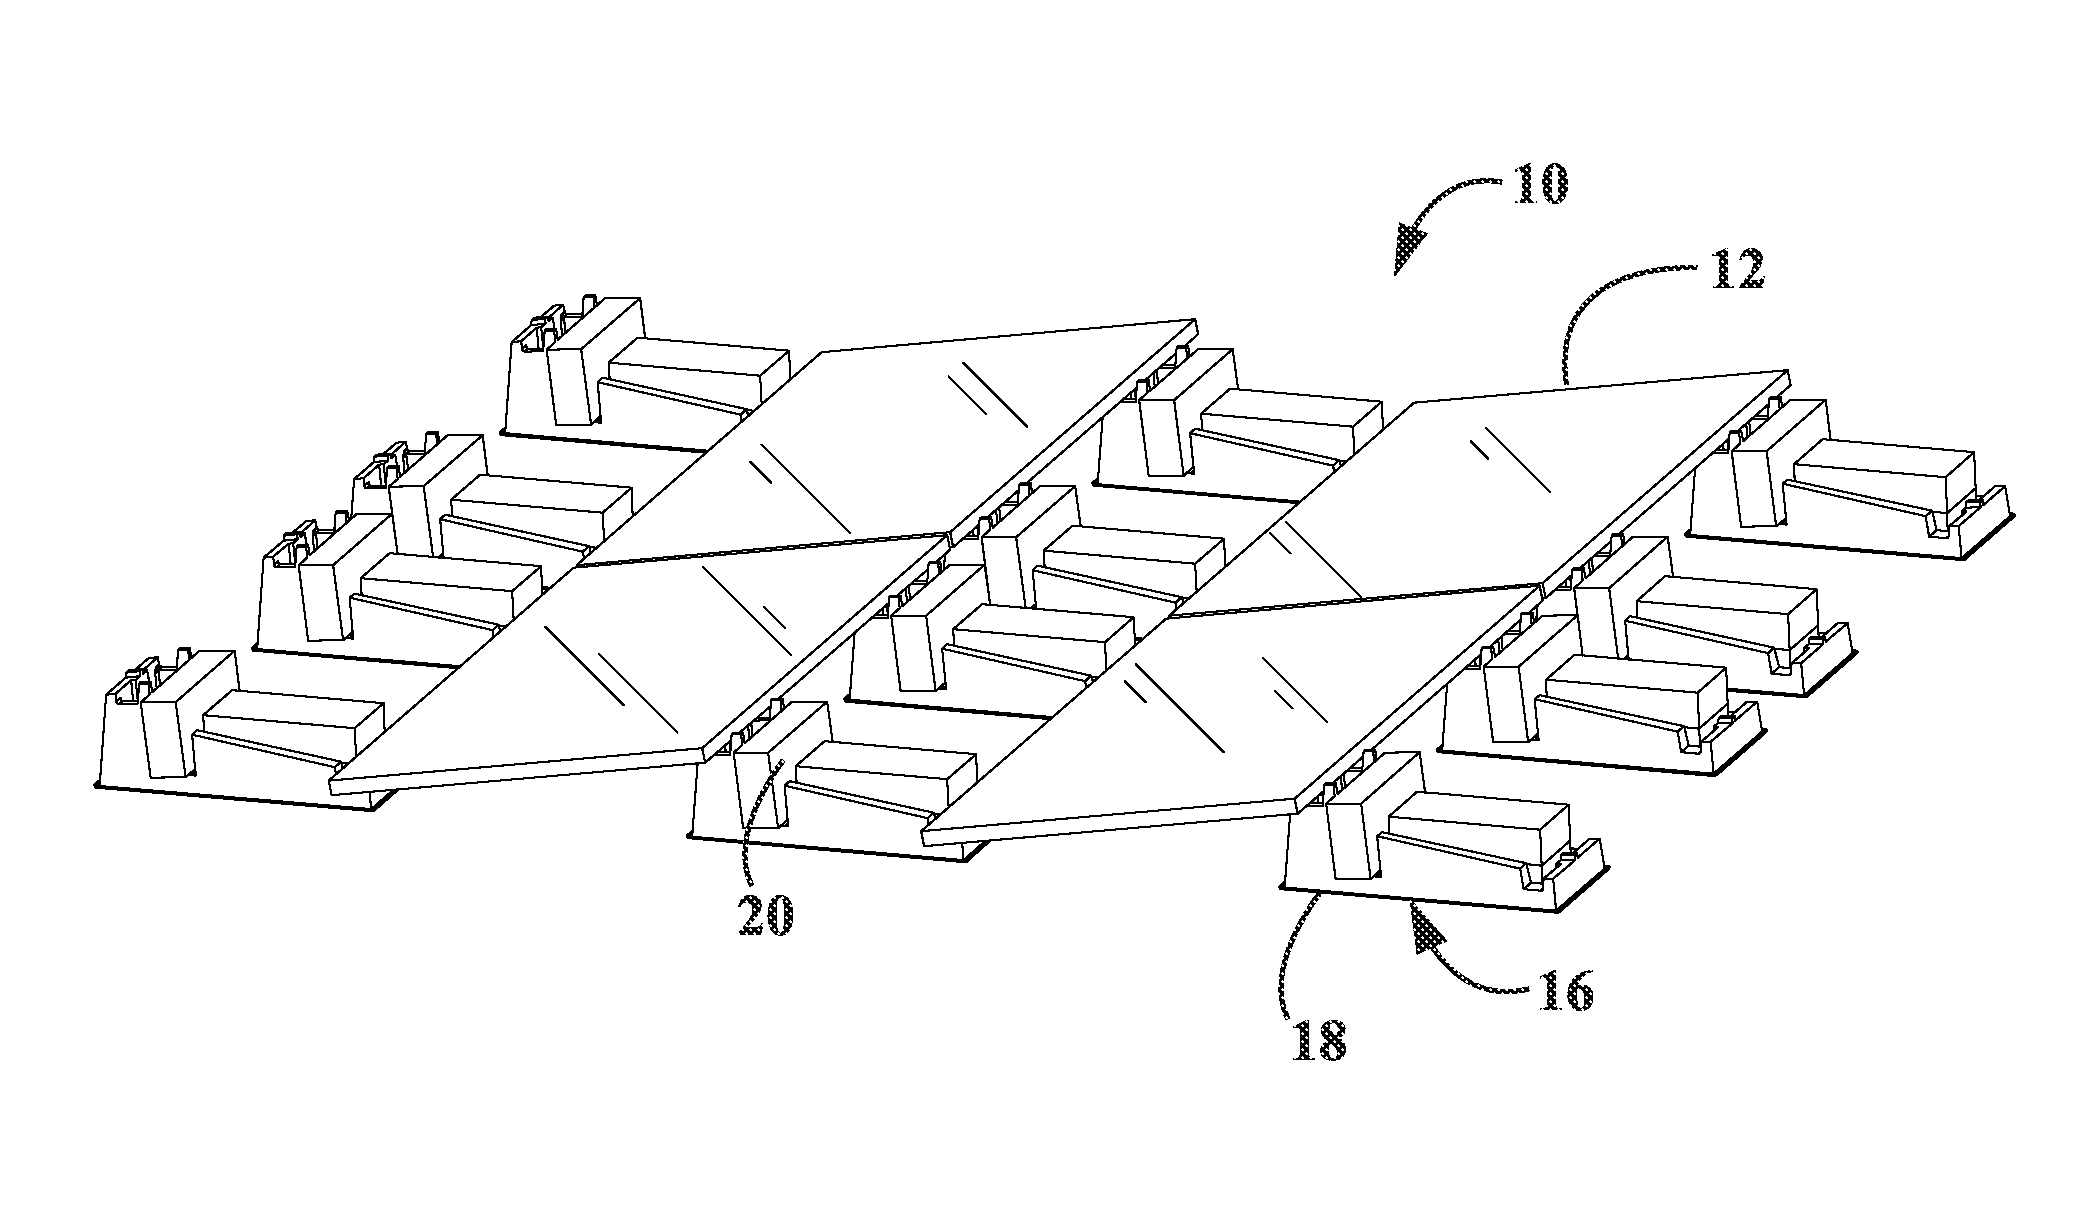 System and method for mounting photovoltaic modules